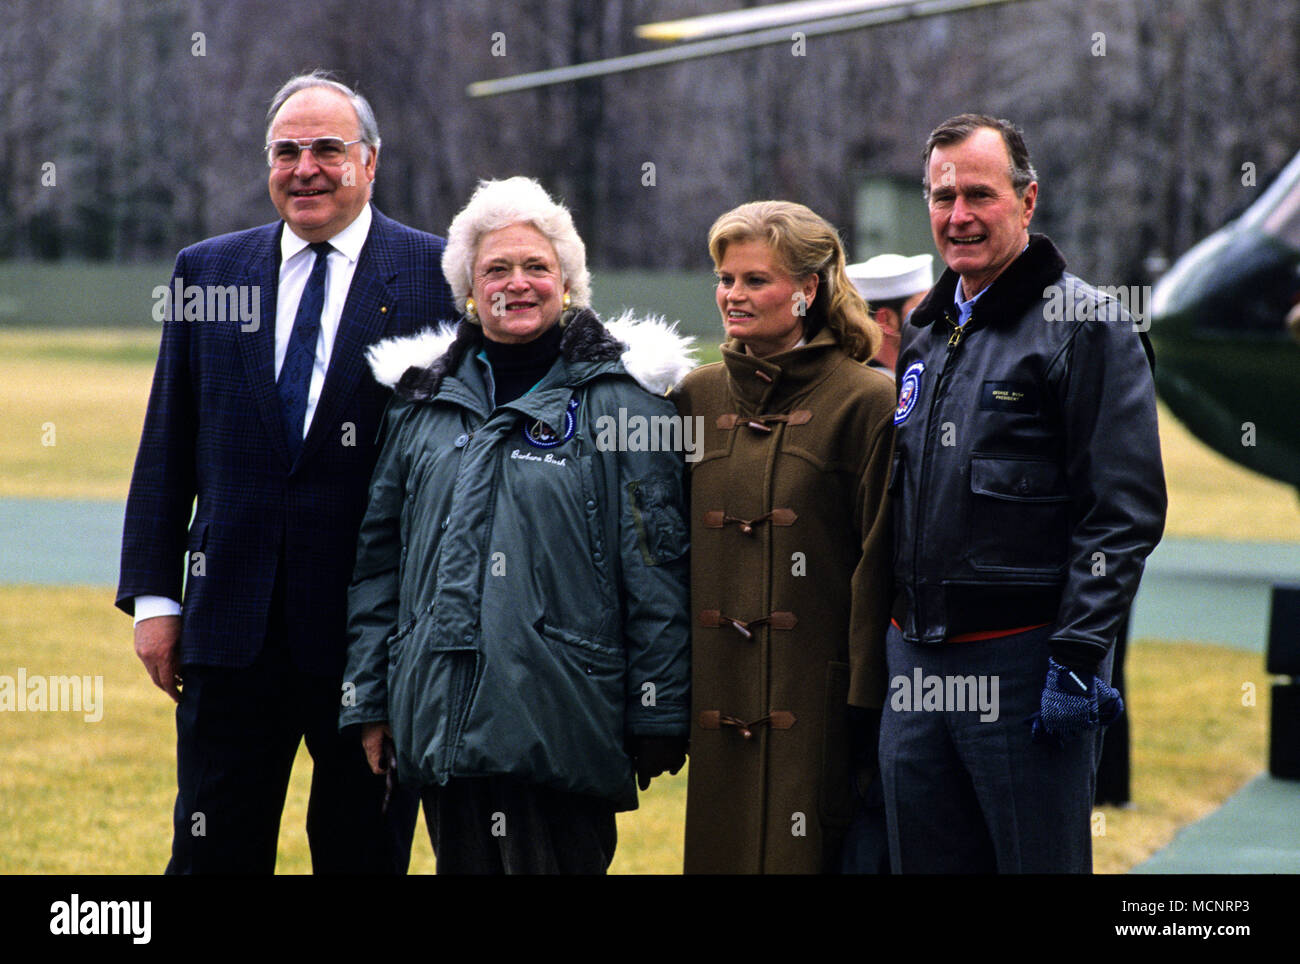 Thurmont, Maryland, USA. 24th Feb, 1990. United States President George H.W. Bush, right, and first lady Barbara Bush, left center, welcome Chancellor Helmut Kohl of West Germany, left, and his wife, Hannelore, right center, to Camp David, the presidential retreat near Thurmont, Maryland on February 24, 1990.Credit: Ron Sachs/CNP Credit: Ron Sachs/CNP/ZUMA Wire/Alamy Live News Stock Photo